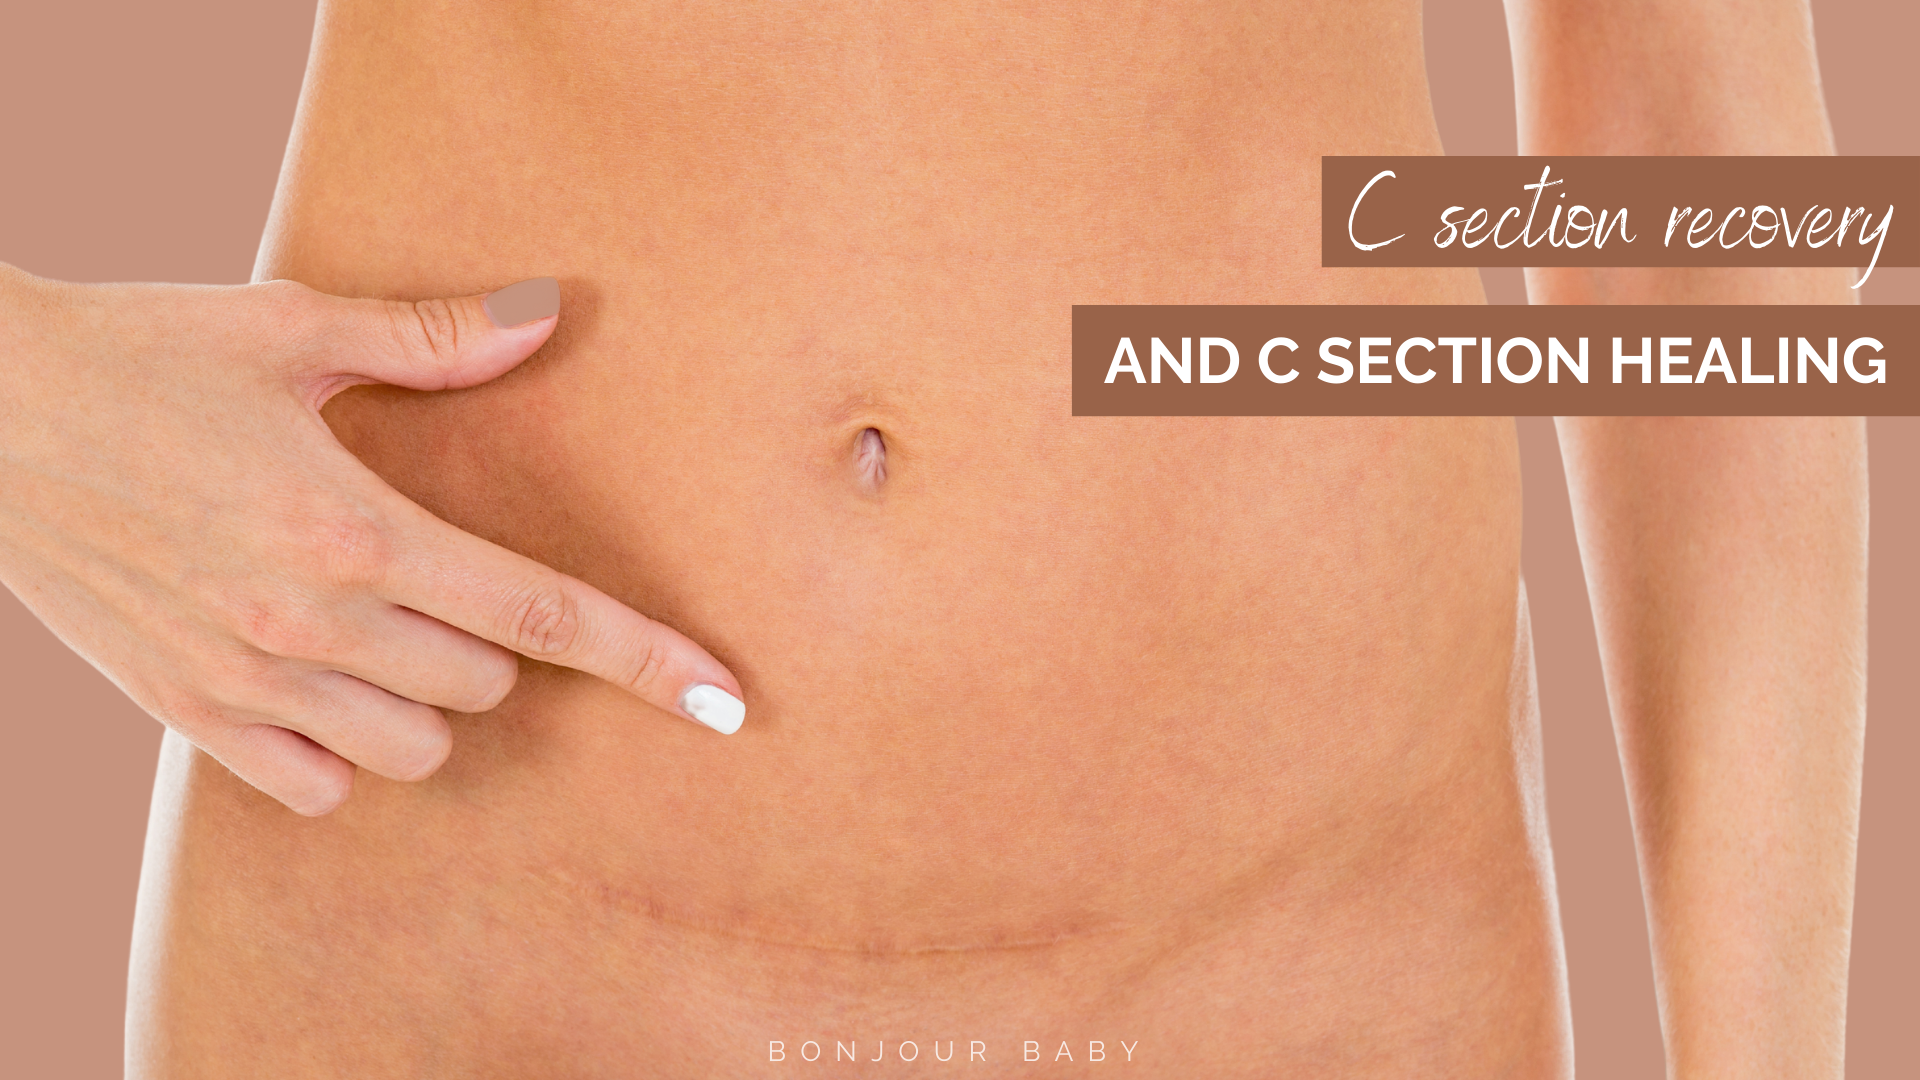 Oh Baby – Now That's a Scar!” Scar Release & C-sections - The